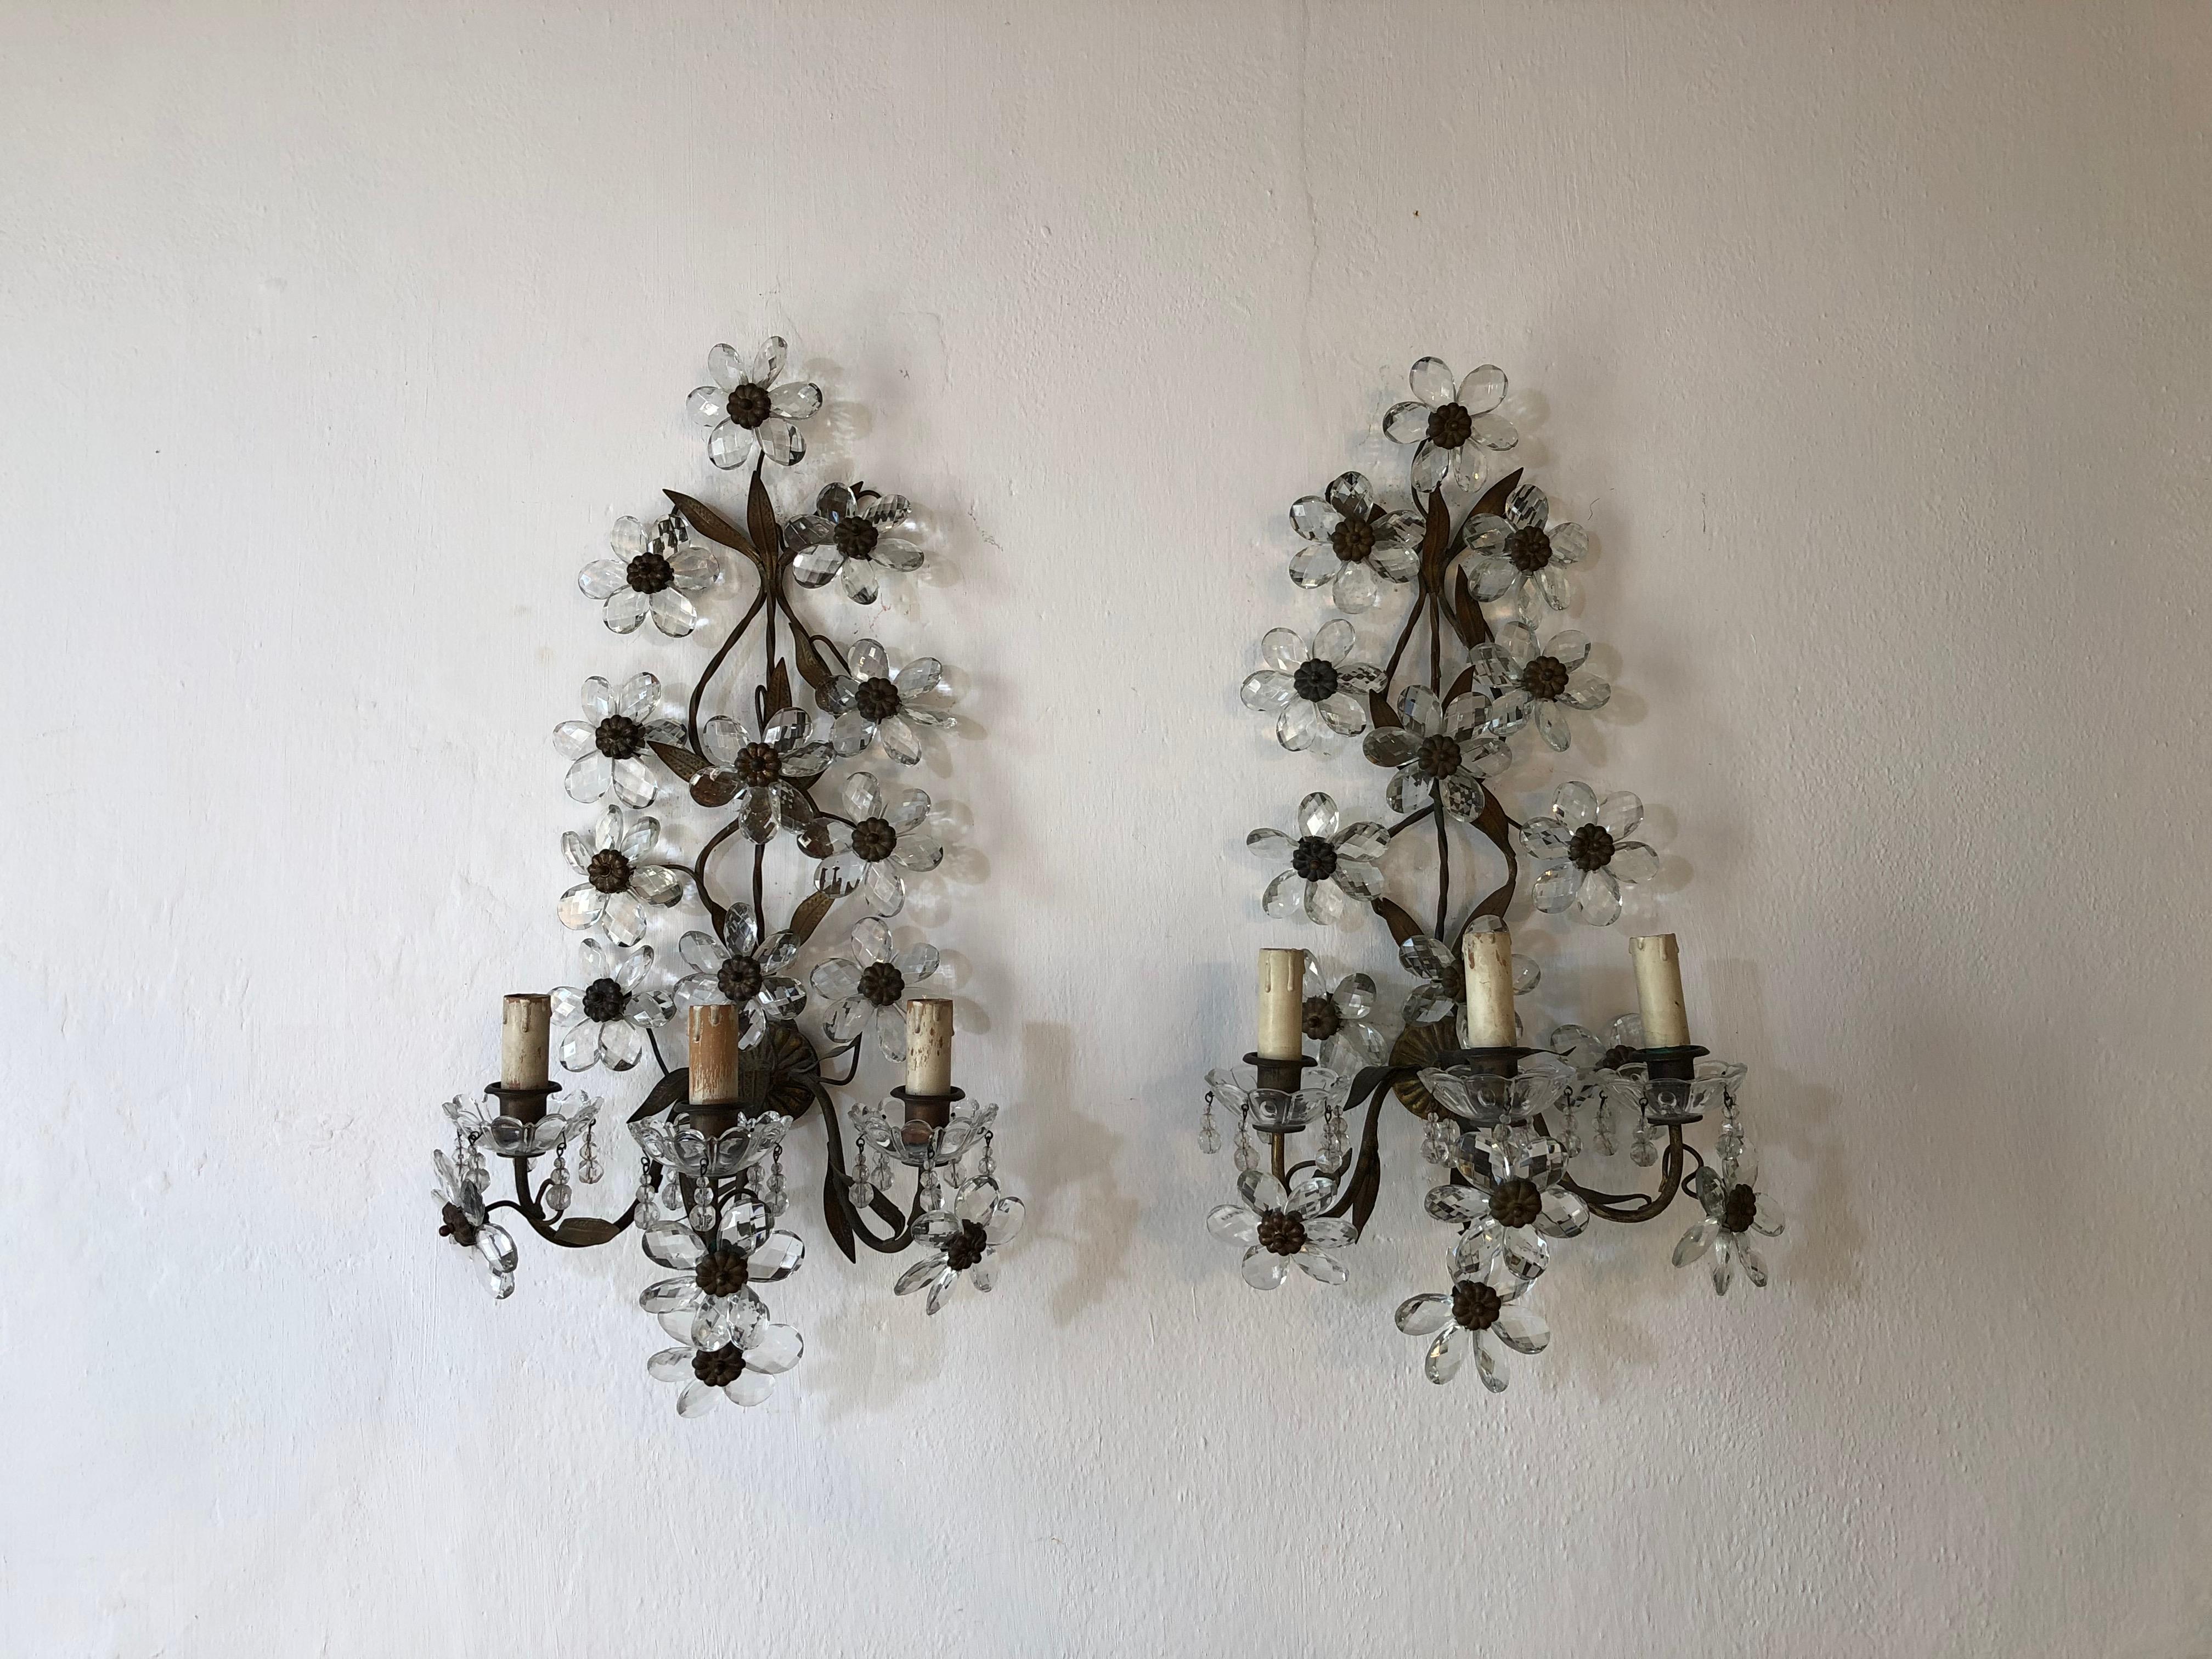 Housing three-light each, sitting in crystal bobeches dripping with crystal beads. Rewired and ready to hang. Brass leaves with perfect patina. Adorning clear prism flowers. Free priority shipping from Italy.